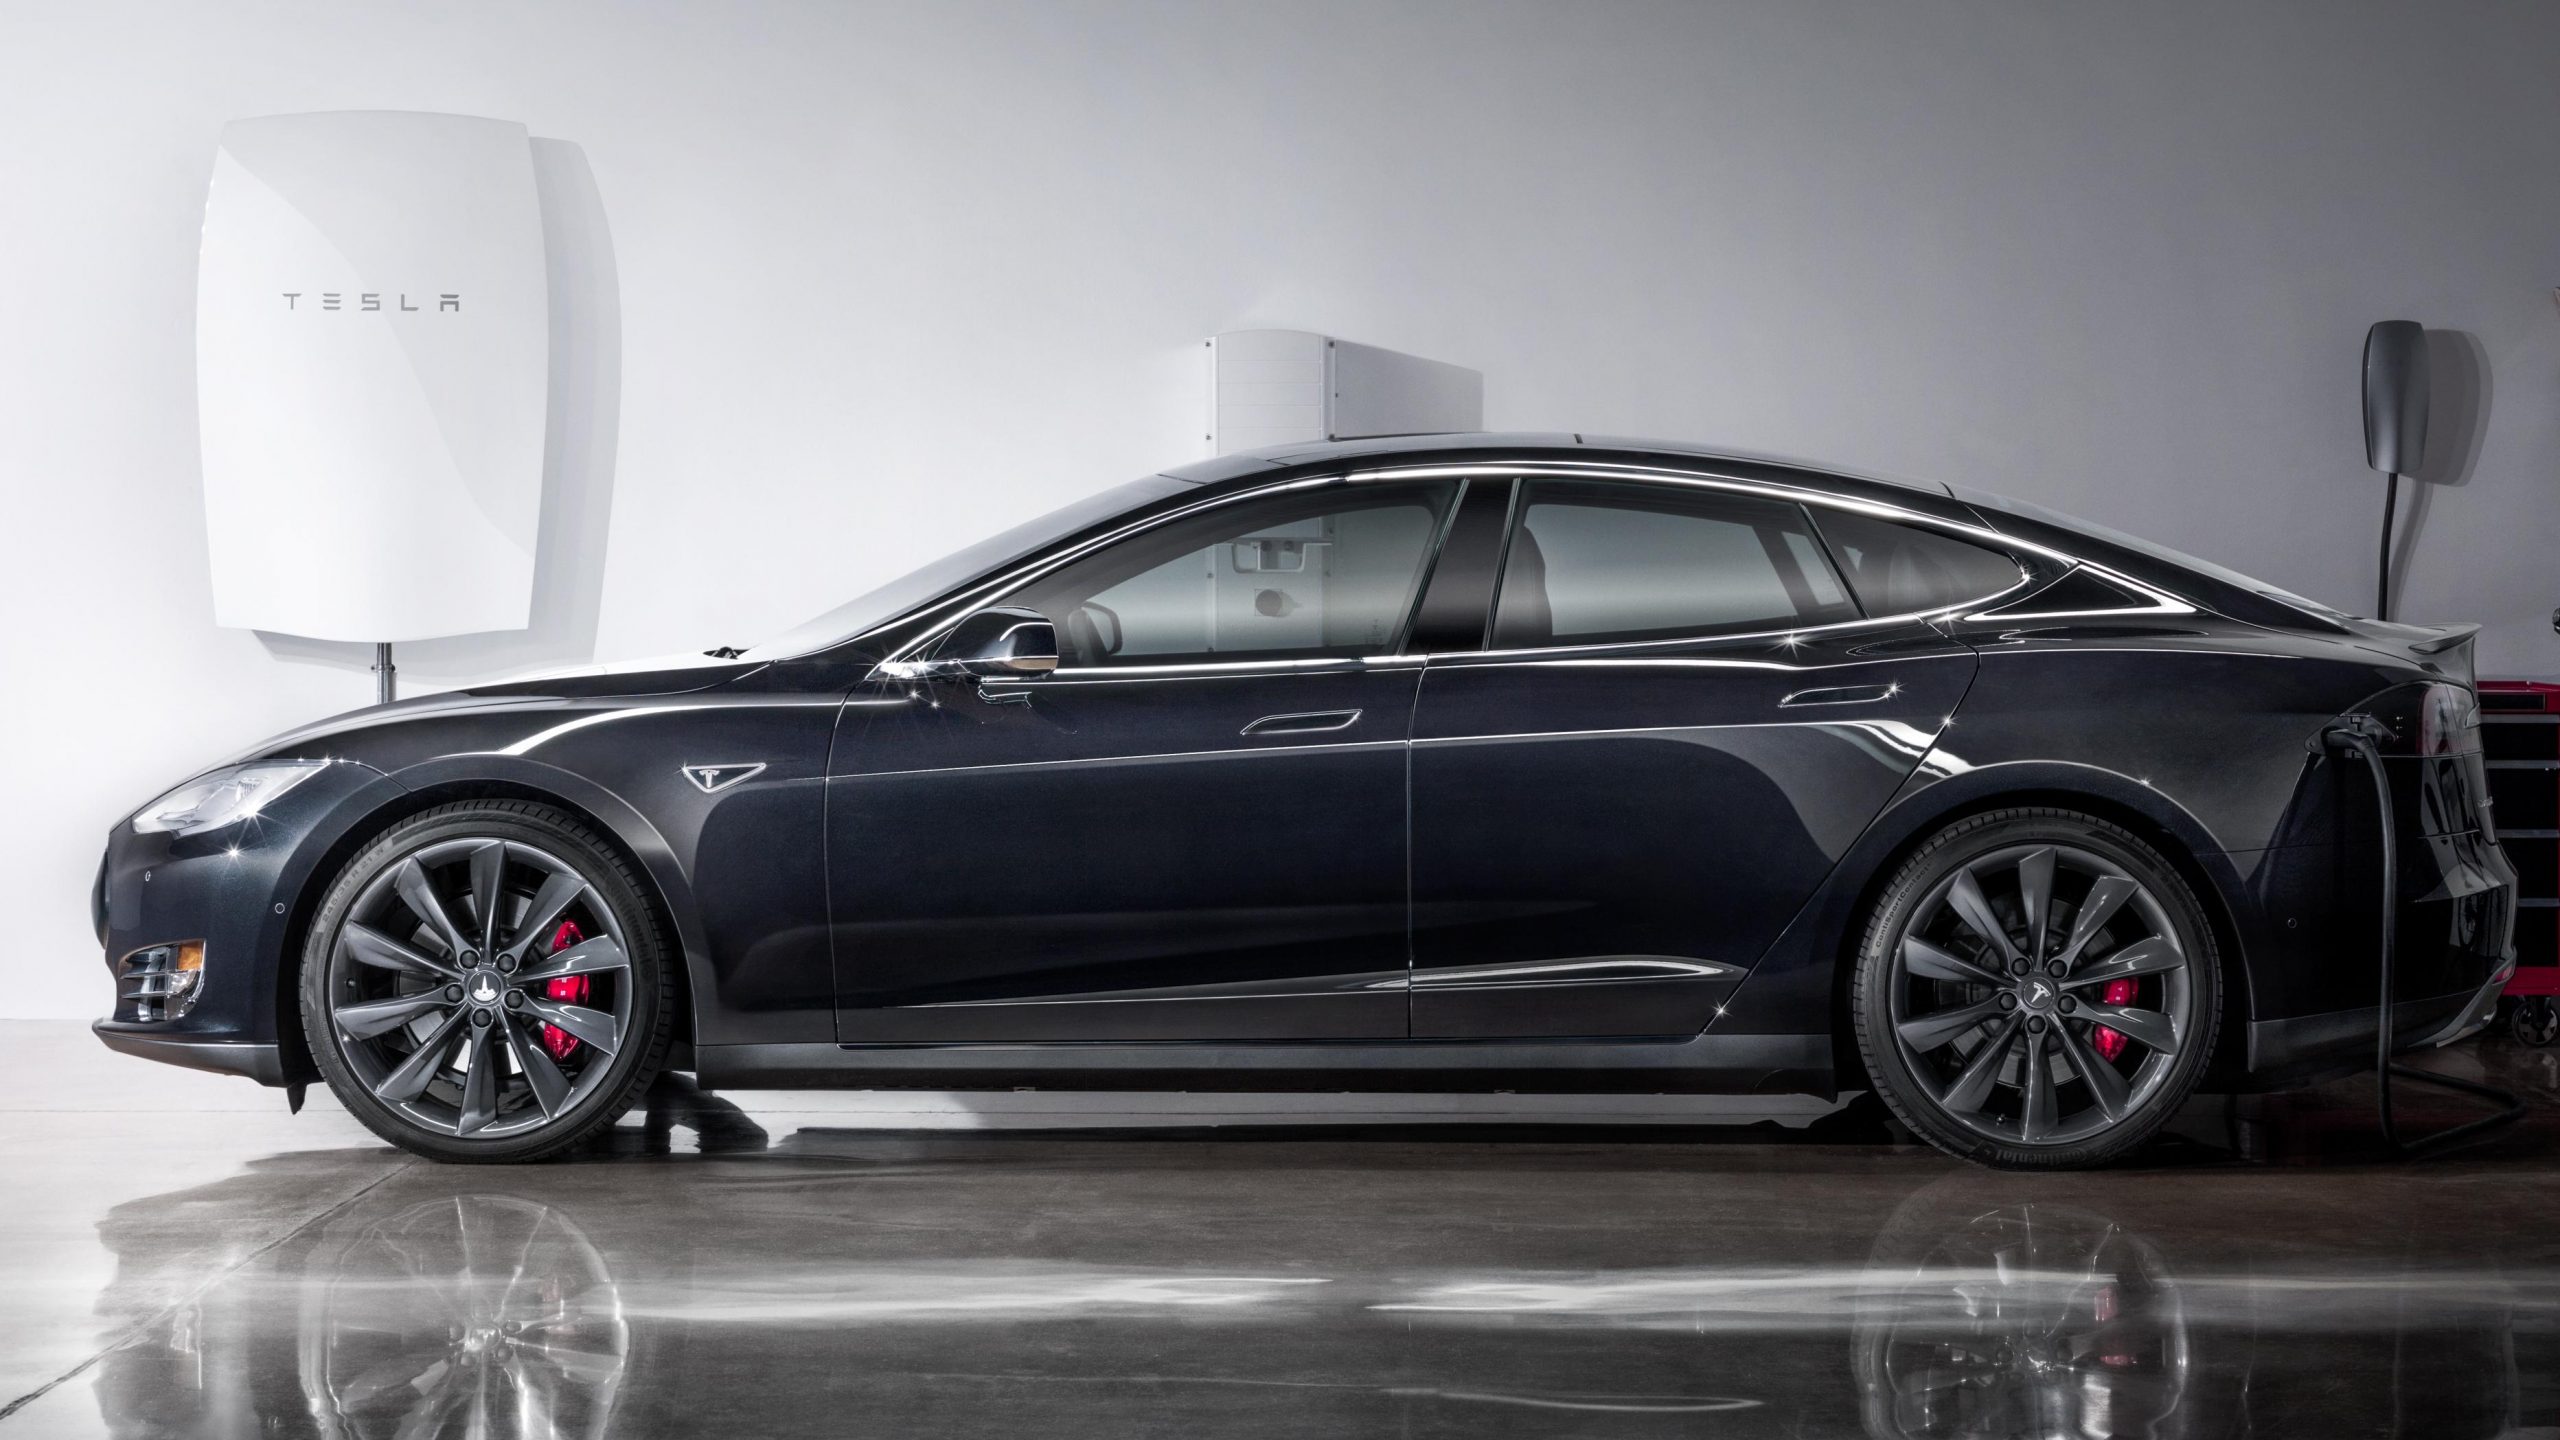 Tesla Disables Features of Used Model S, Asks for $4,500